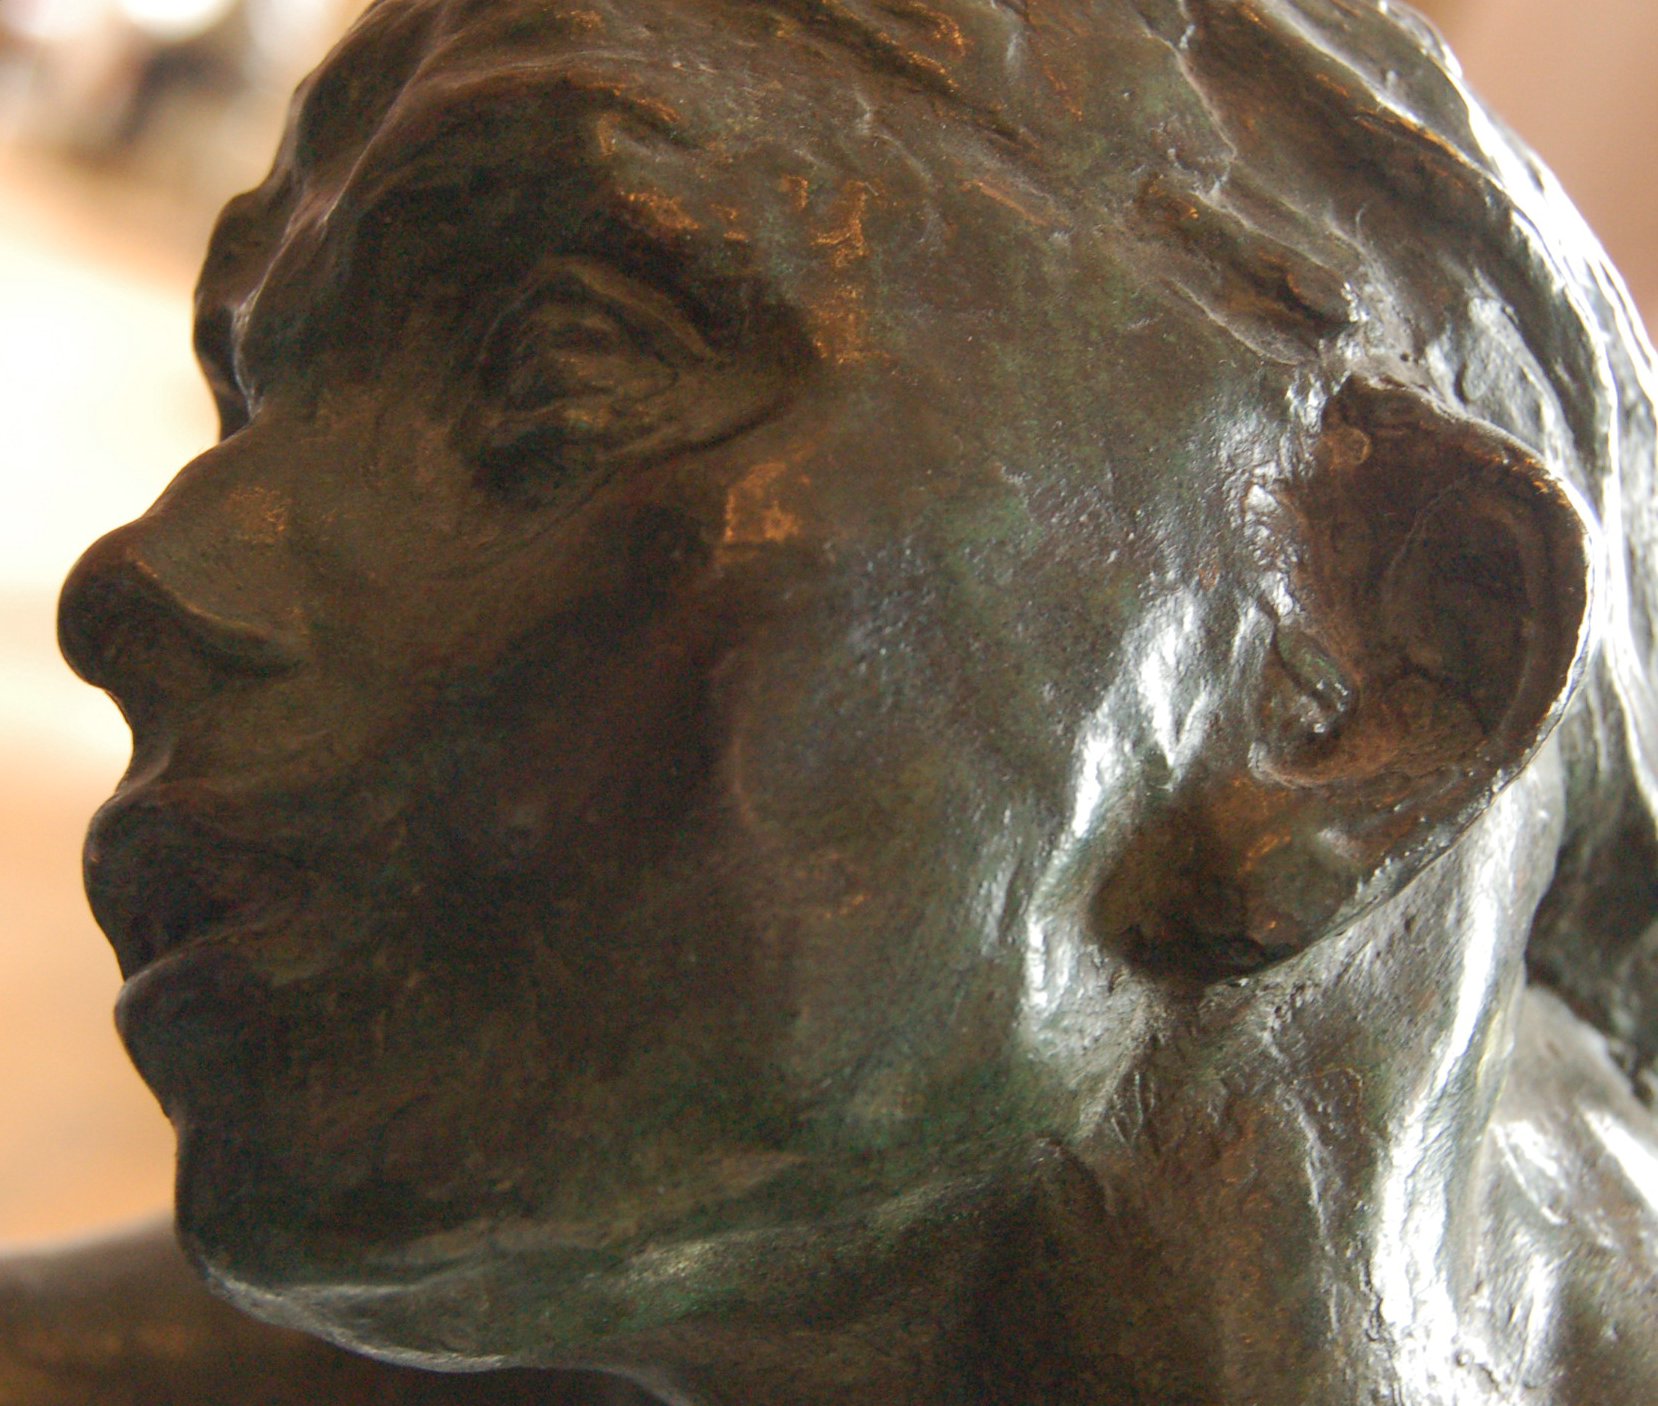 a statue of a person with his face facing down